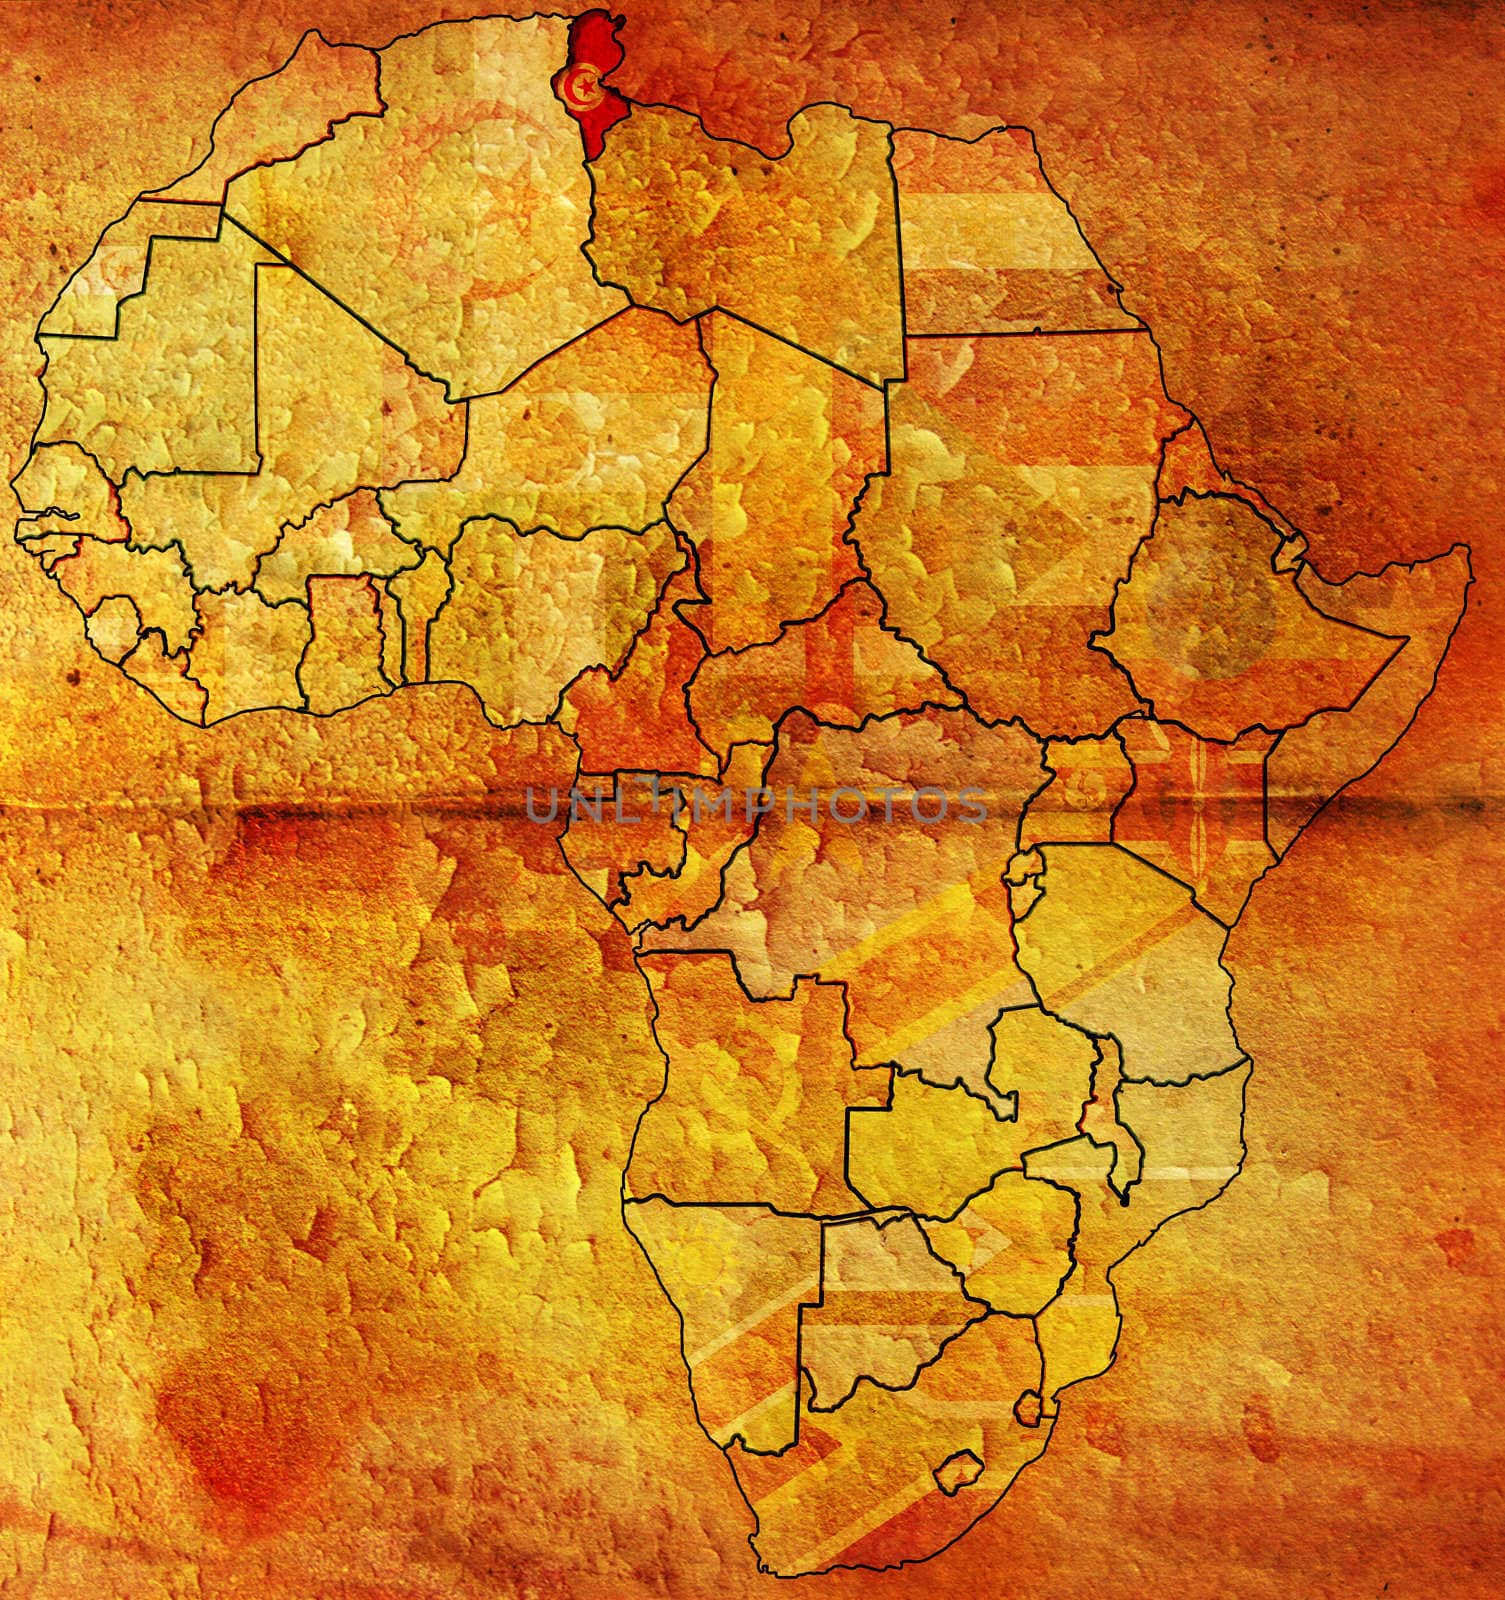 tunisia on africa map by michal812